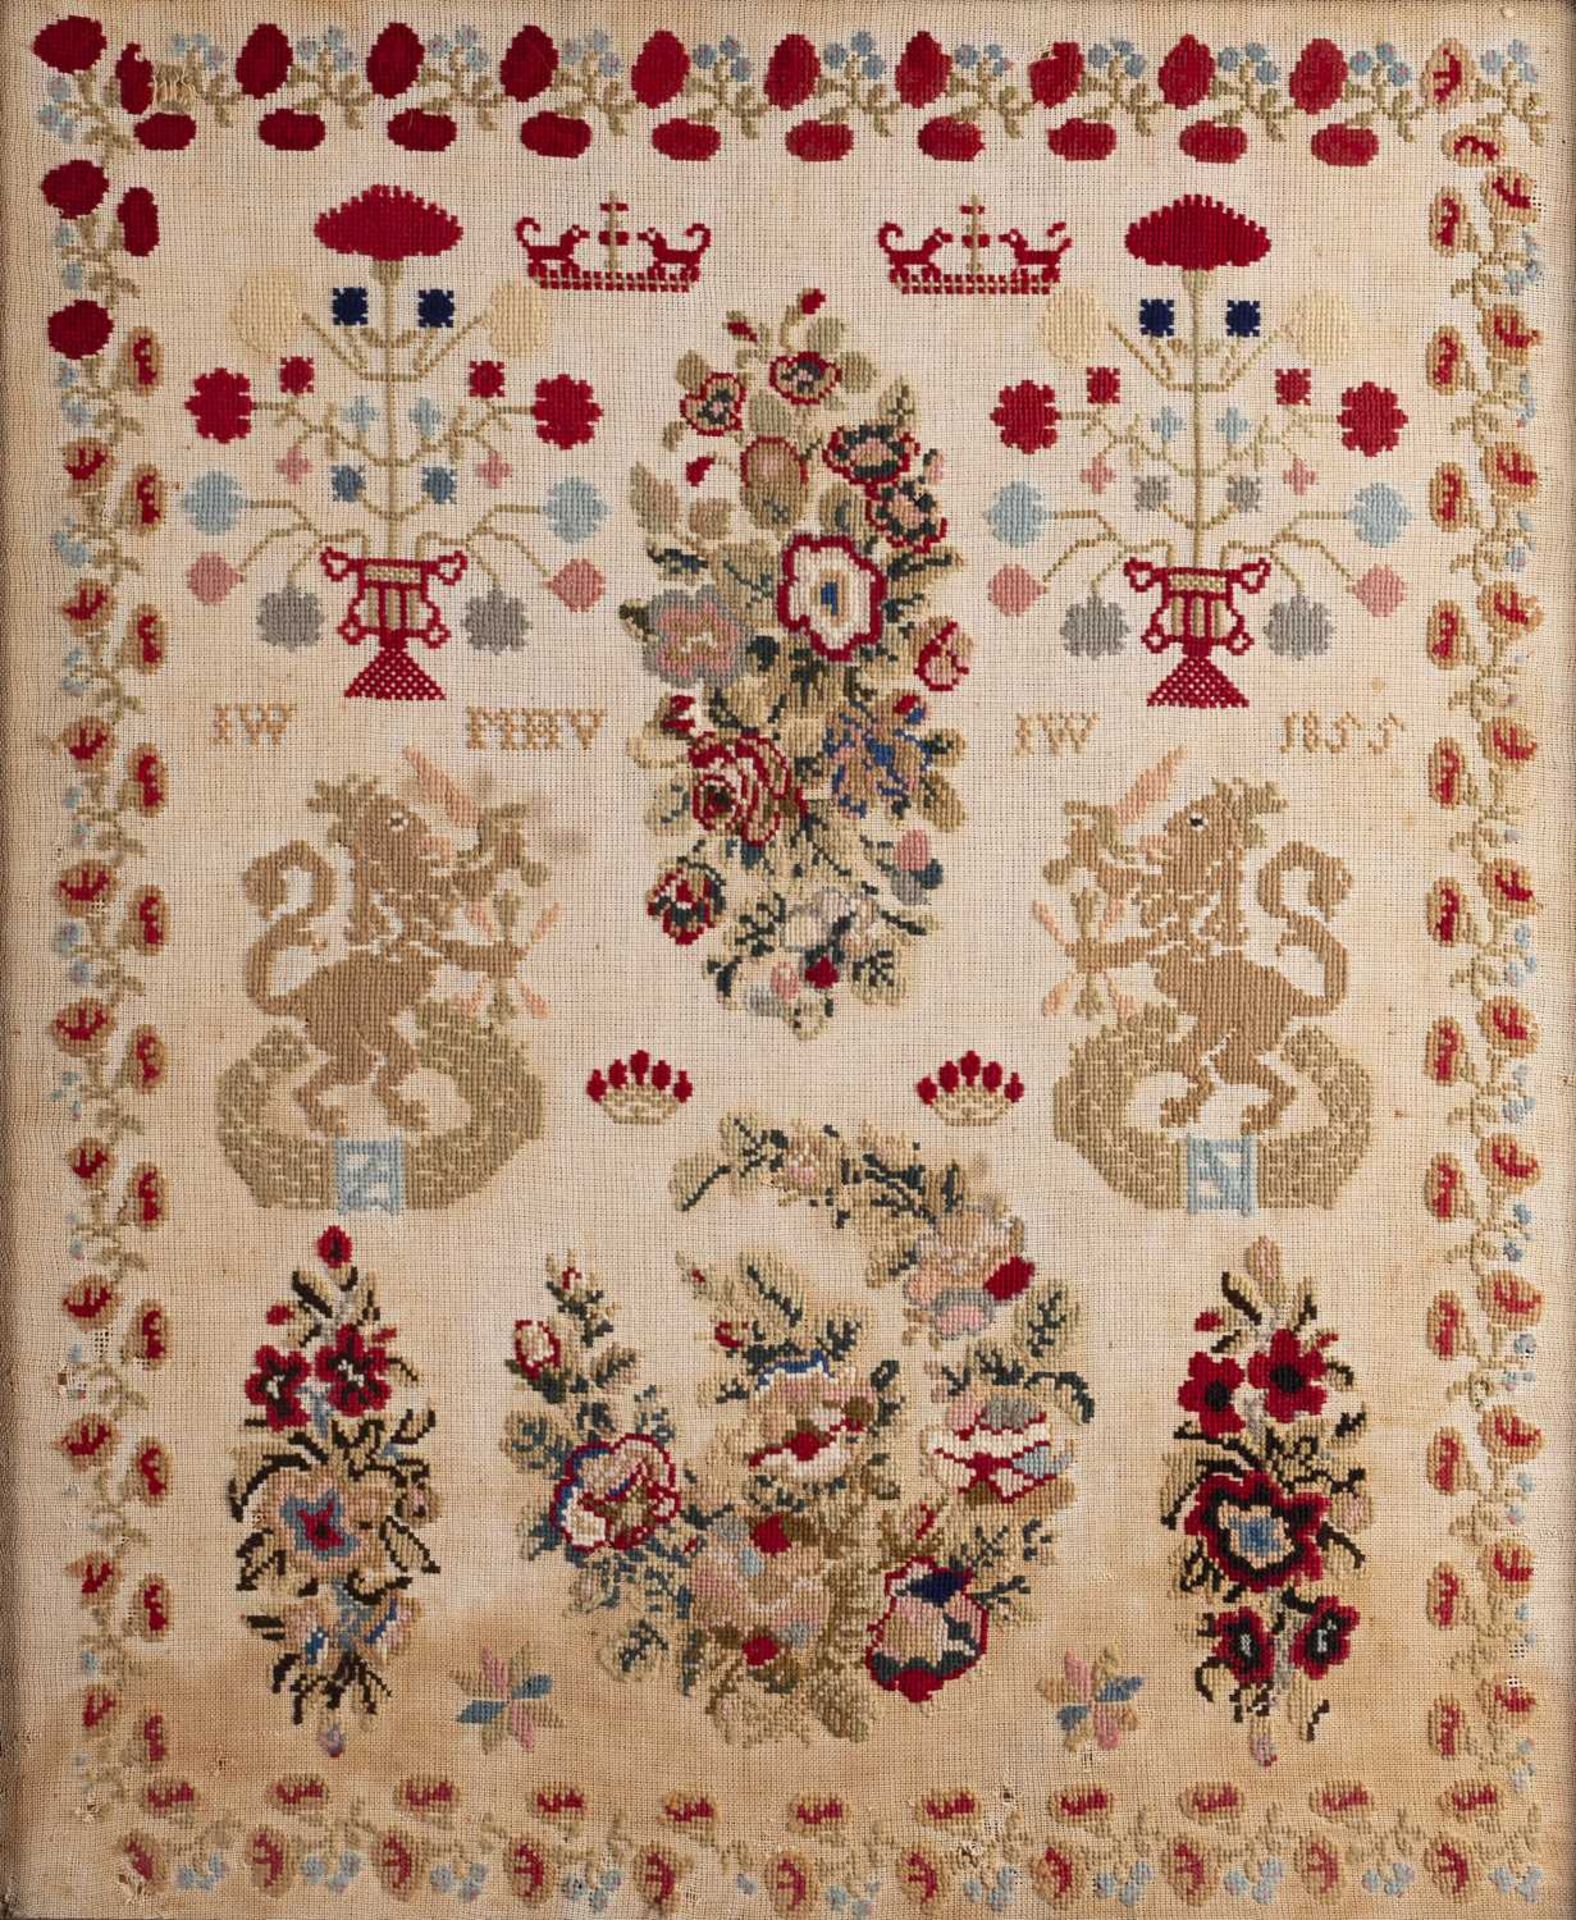 19th Century Dutch needlework sampler decorated with flowers, dogs and lions, dated 1855, with